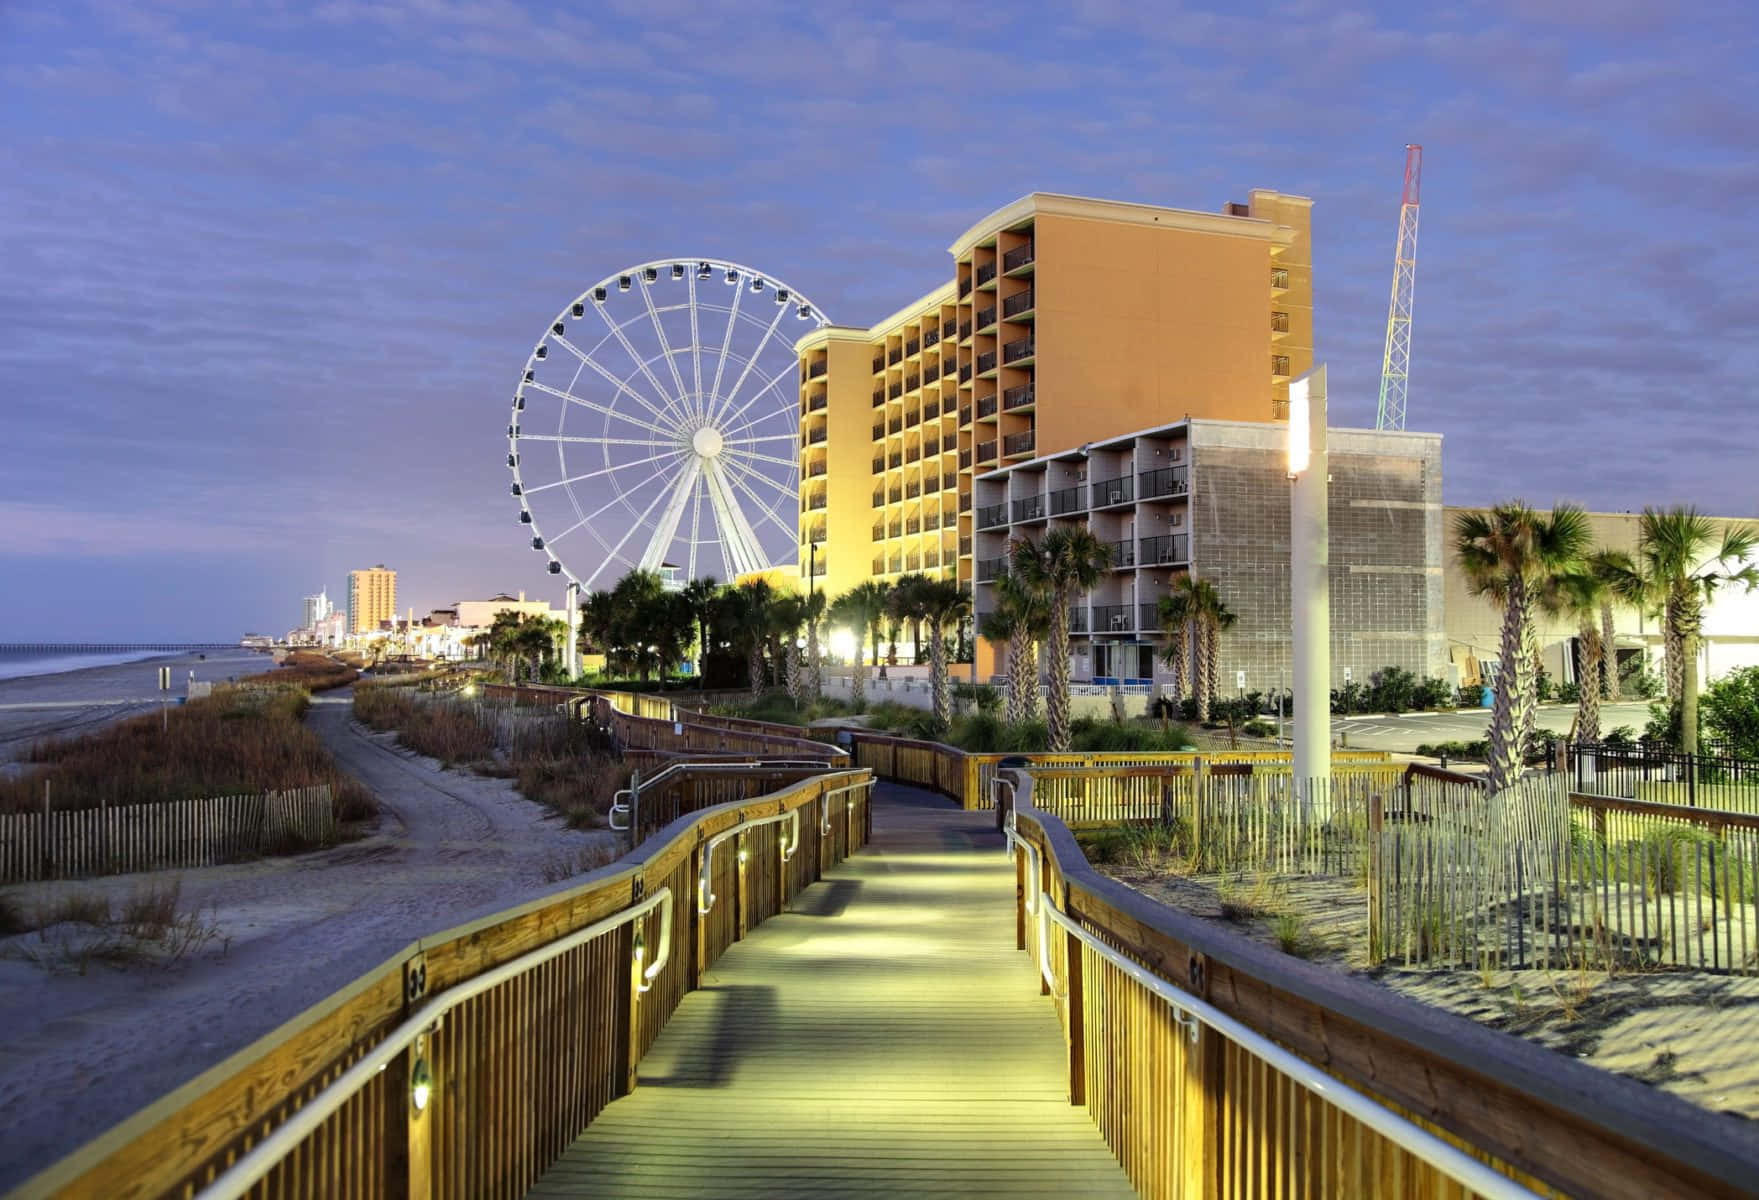 A Walkway Leading To The Beach And Ferris Wheel